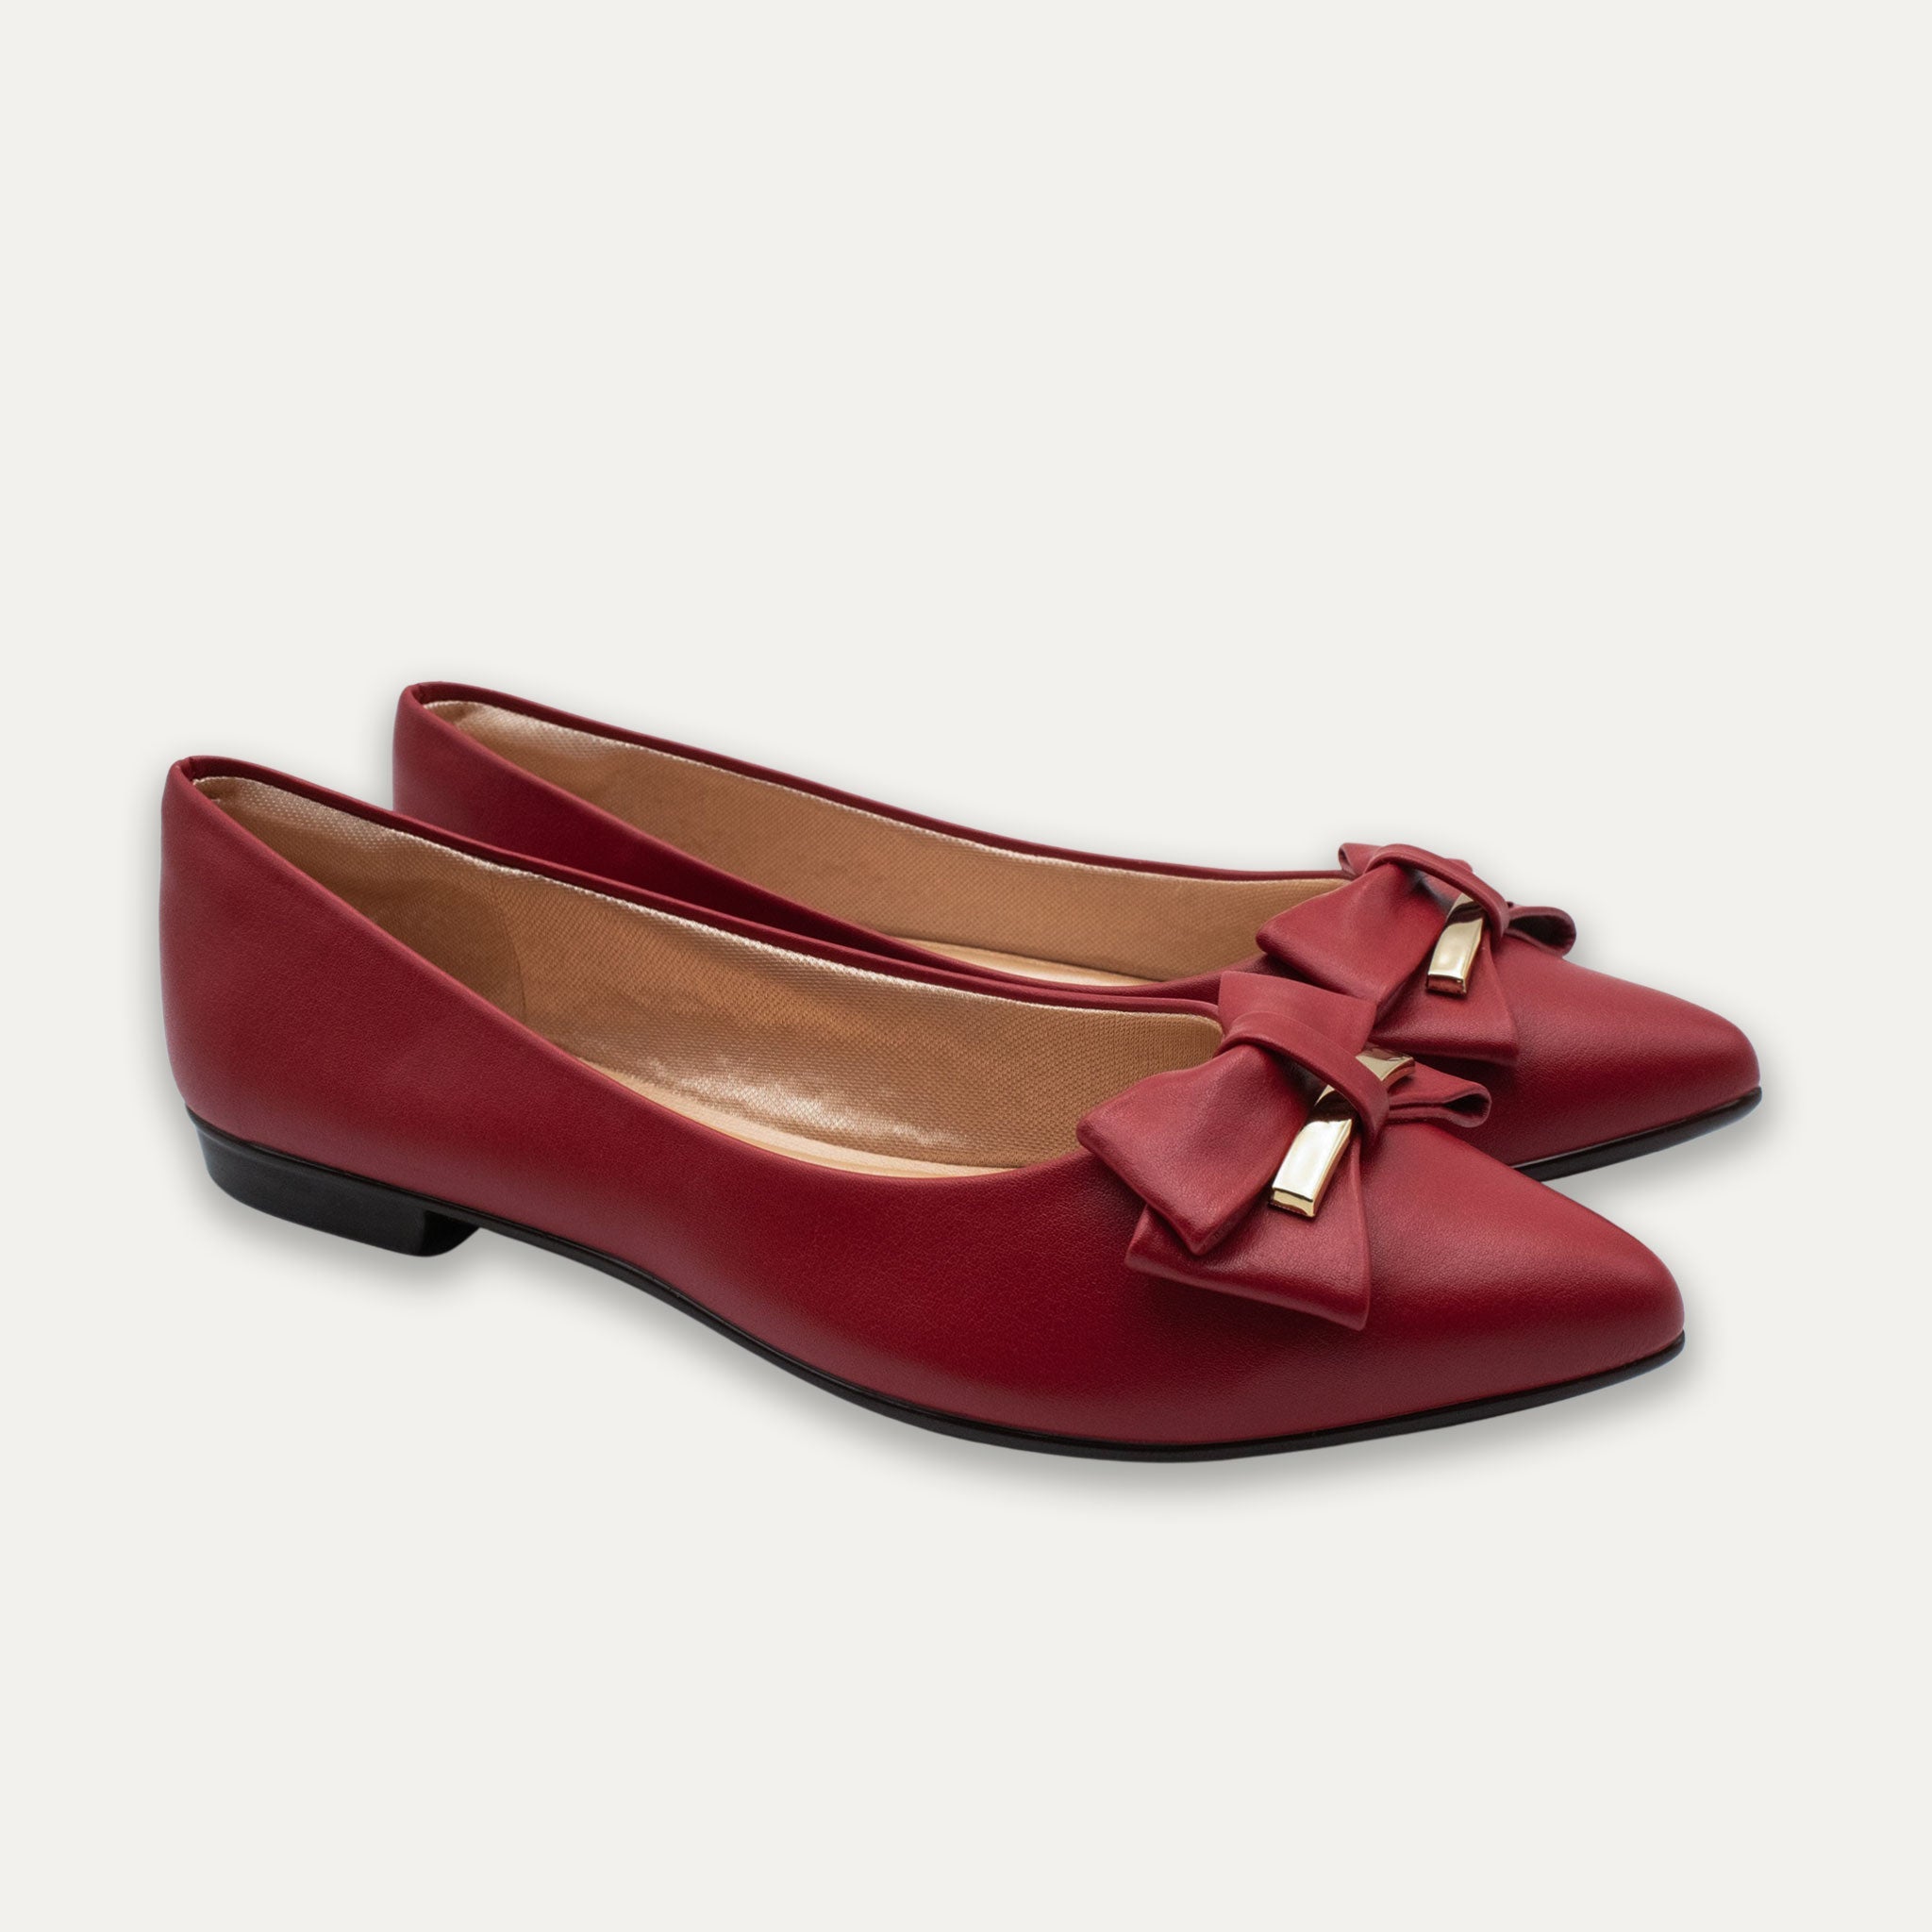 Belkis Pointed Toe Flats Red